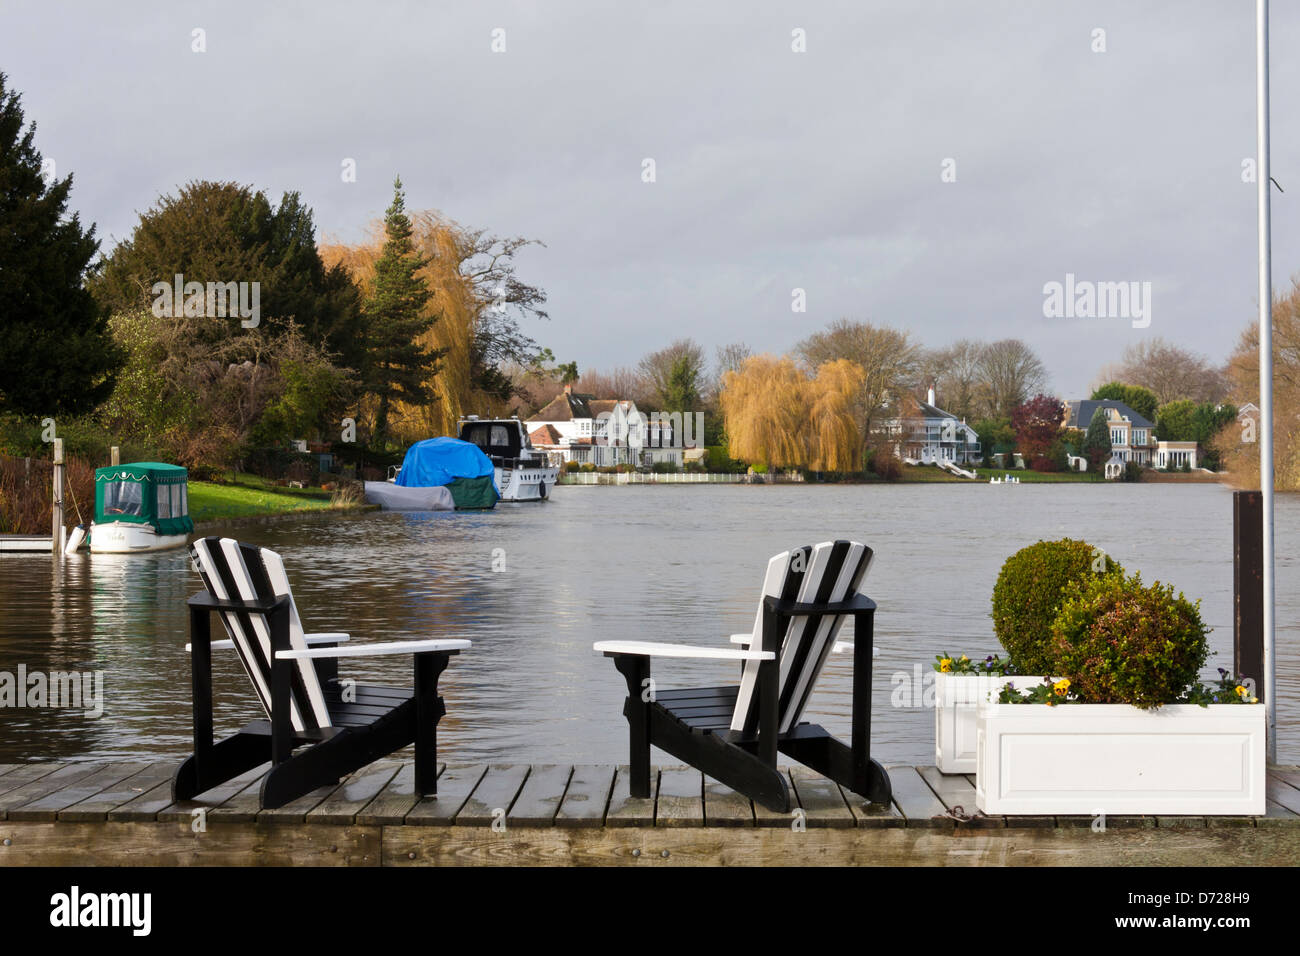 A small jetty outside The Waterside Inn at Bray, Berkshire, England, GB, UK Stock Photo